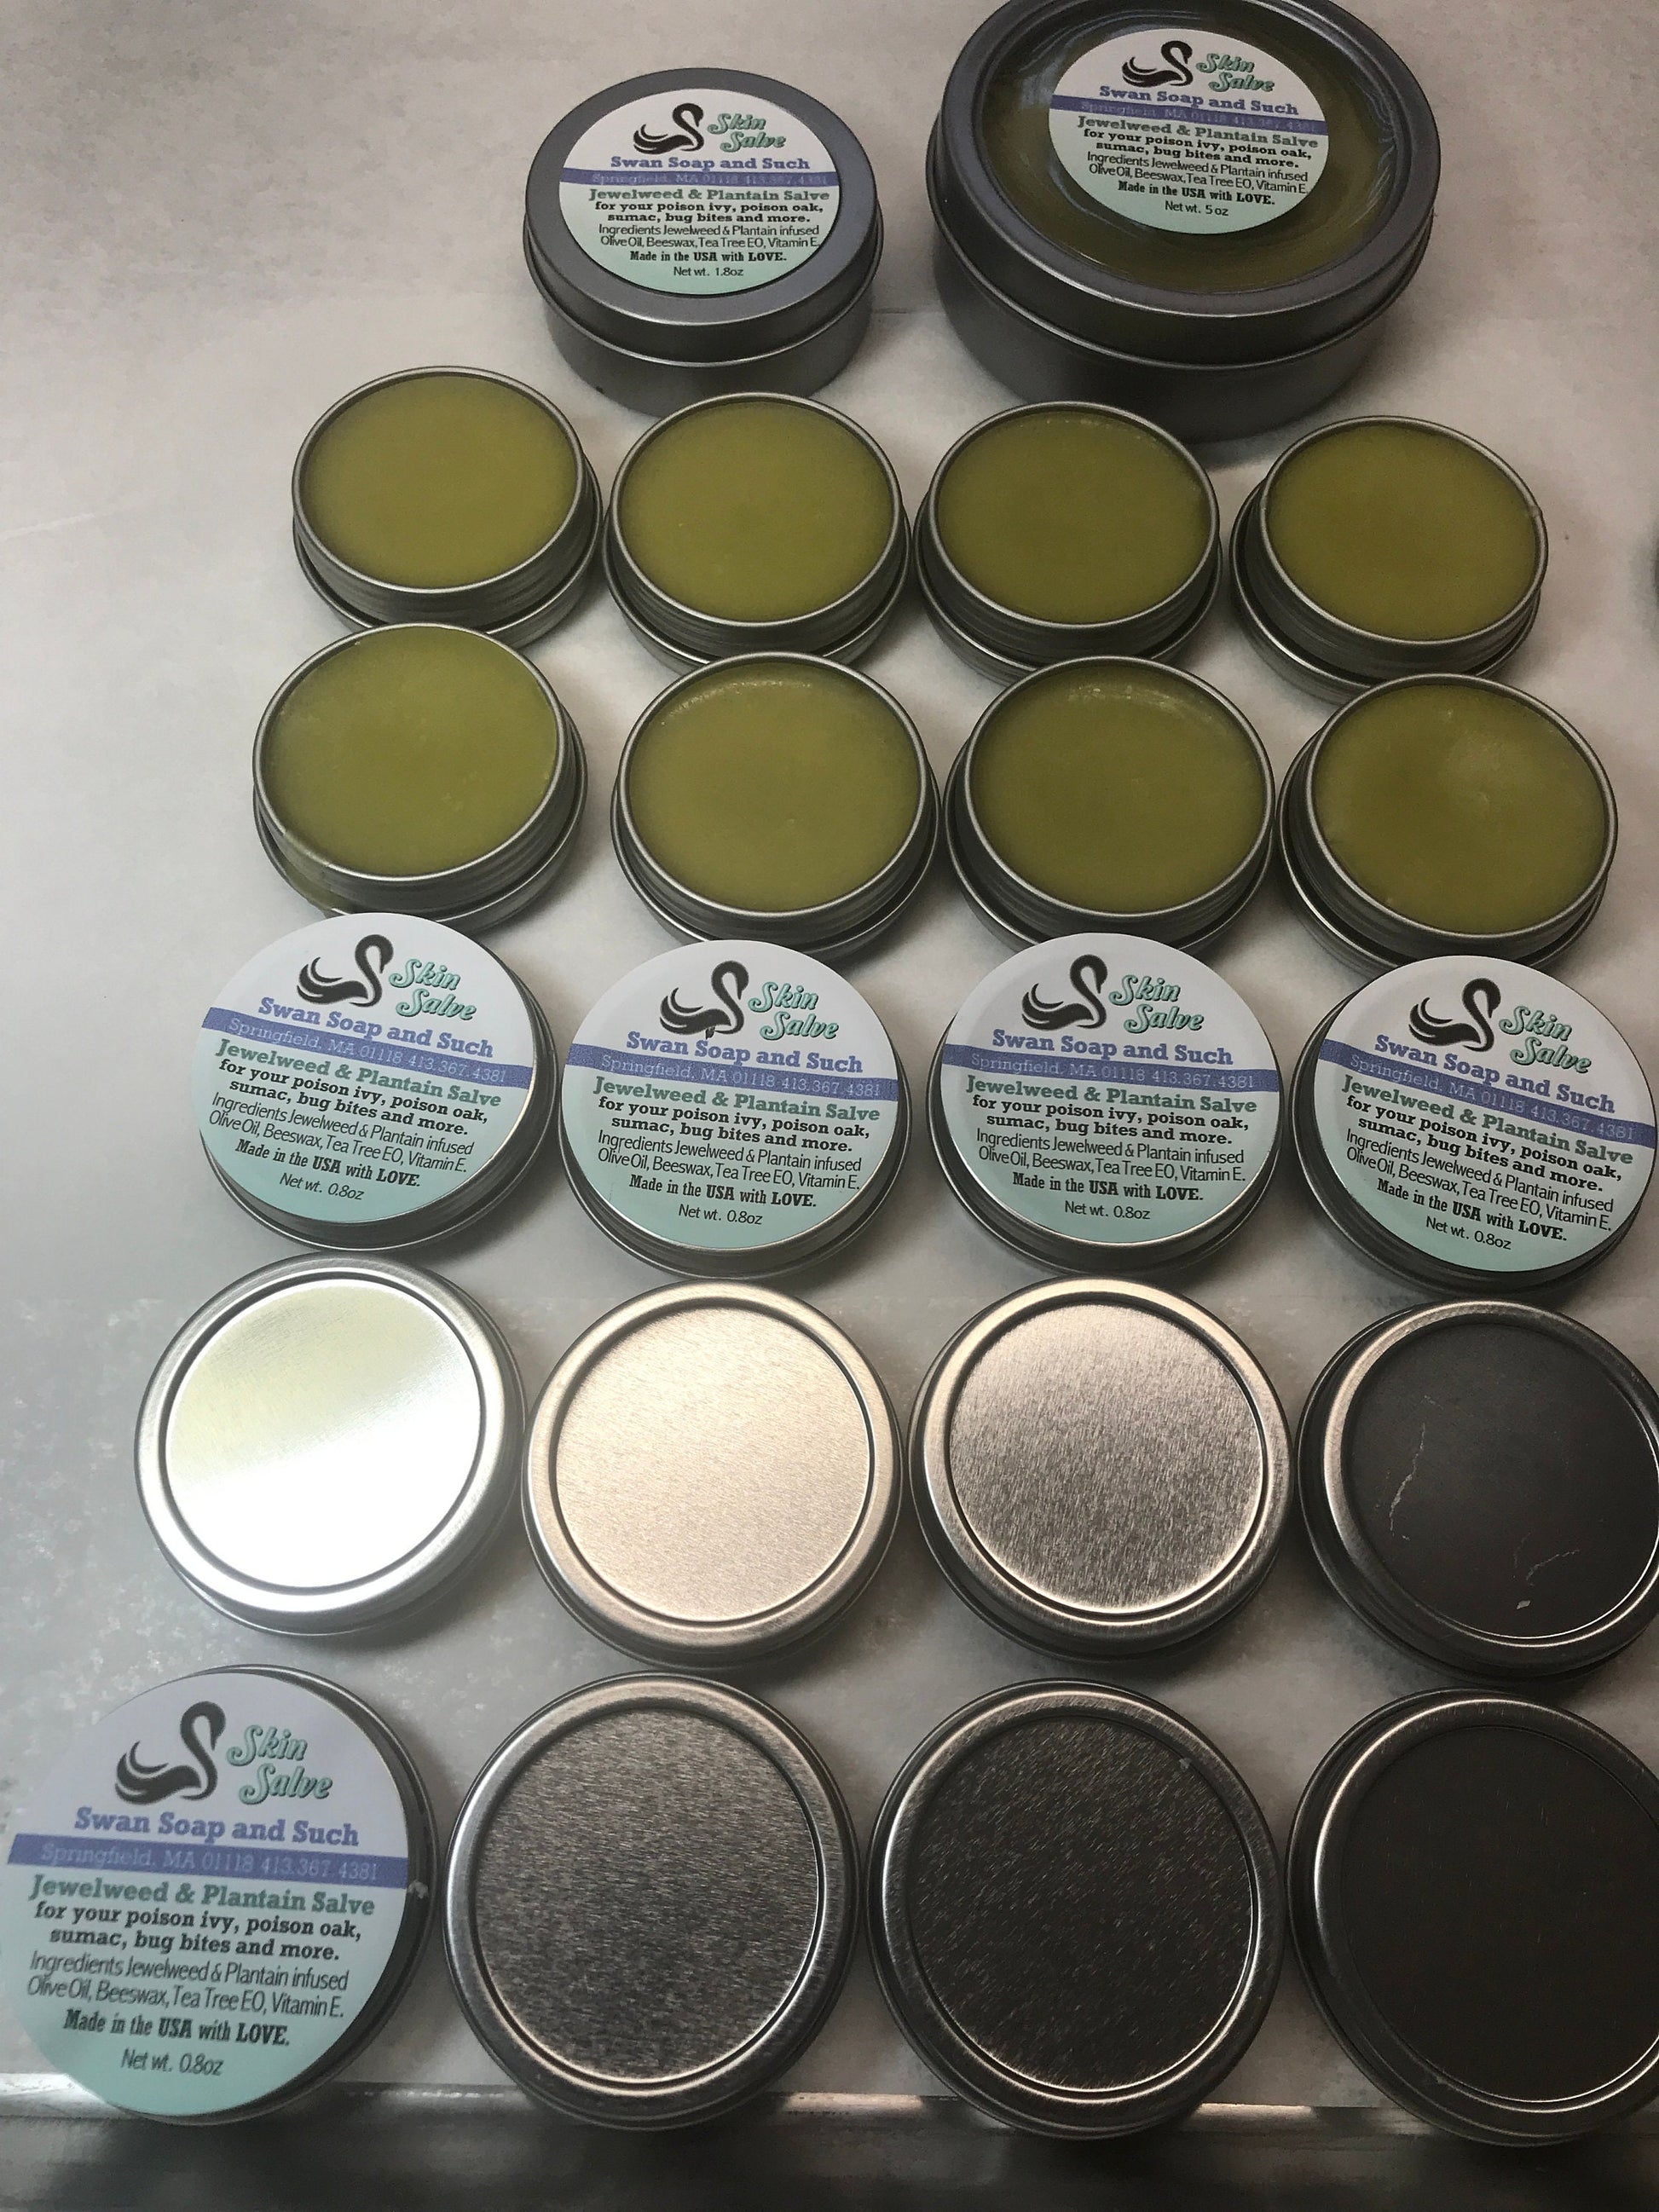 A photo showing a container of Jewelweed and Plantain Salve Balm